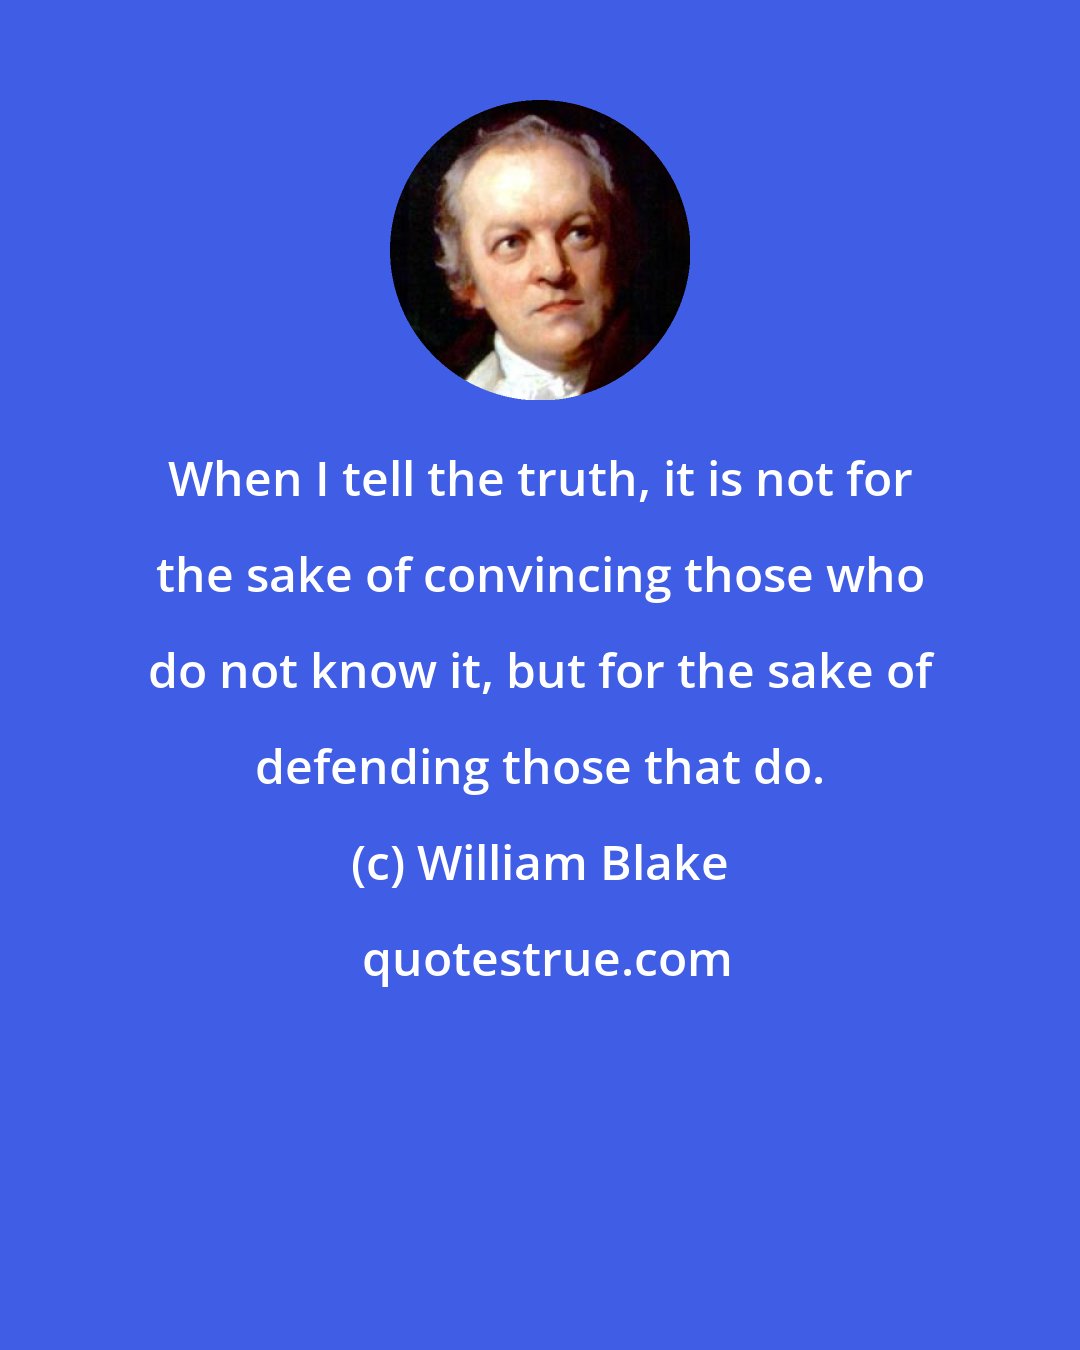 William Blake: When I tell the truth, it is not for the sake of convincing those who do not know it, but for the sake of defending those that do.